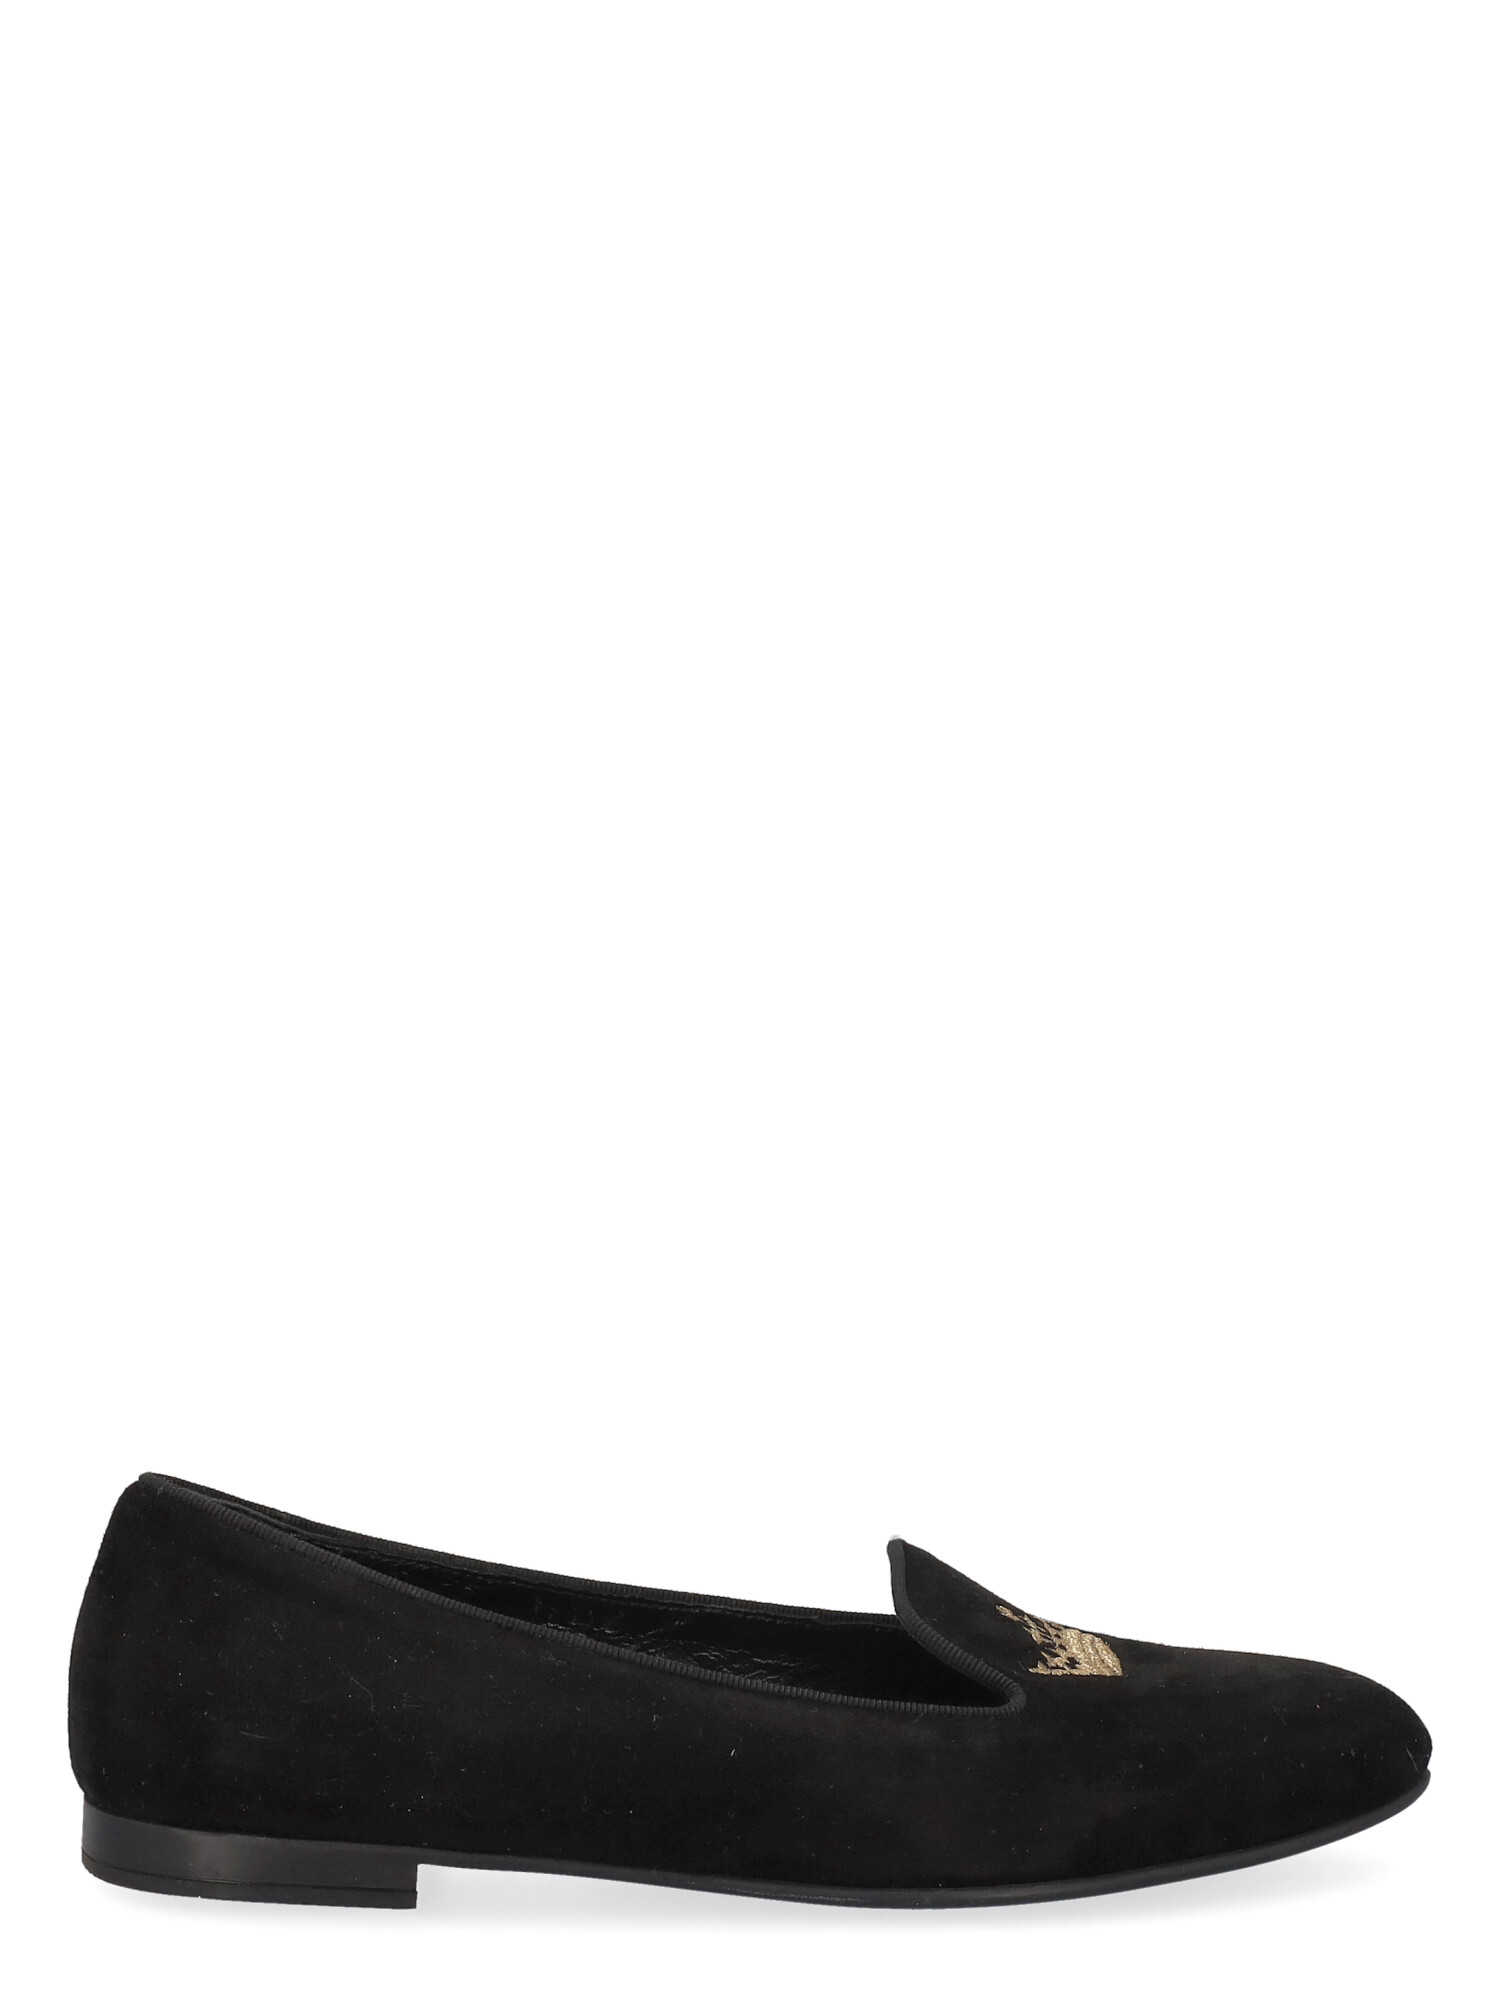 Pre-owned Church's Women's Loafers -  - In Black Leather